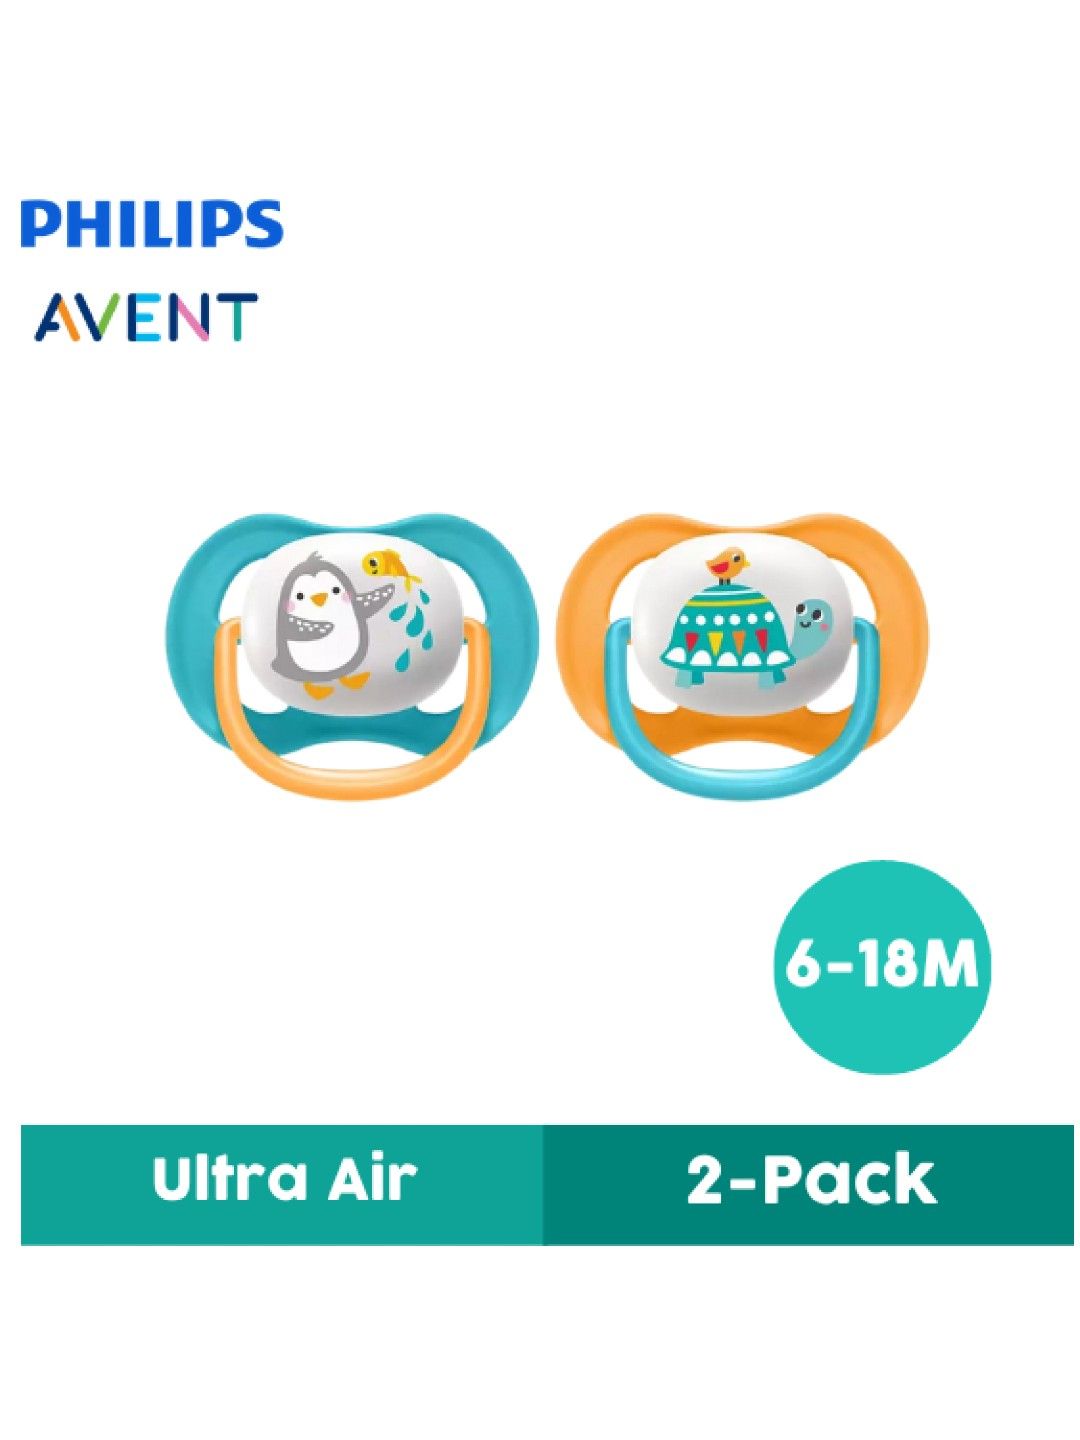 Avent Philips Avent 6-18M Ultra Air Pacifier (2-pack)